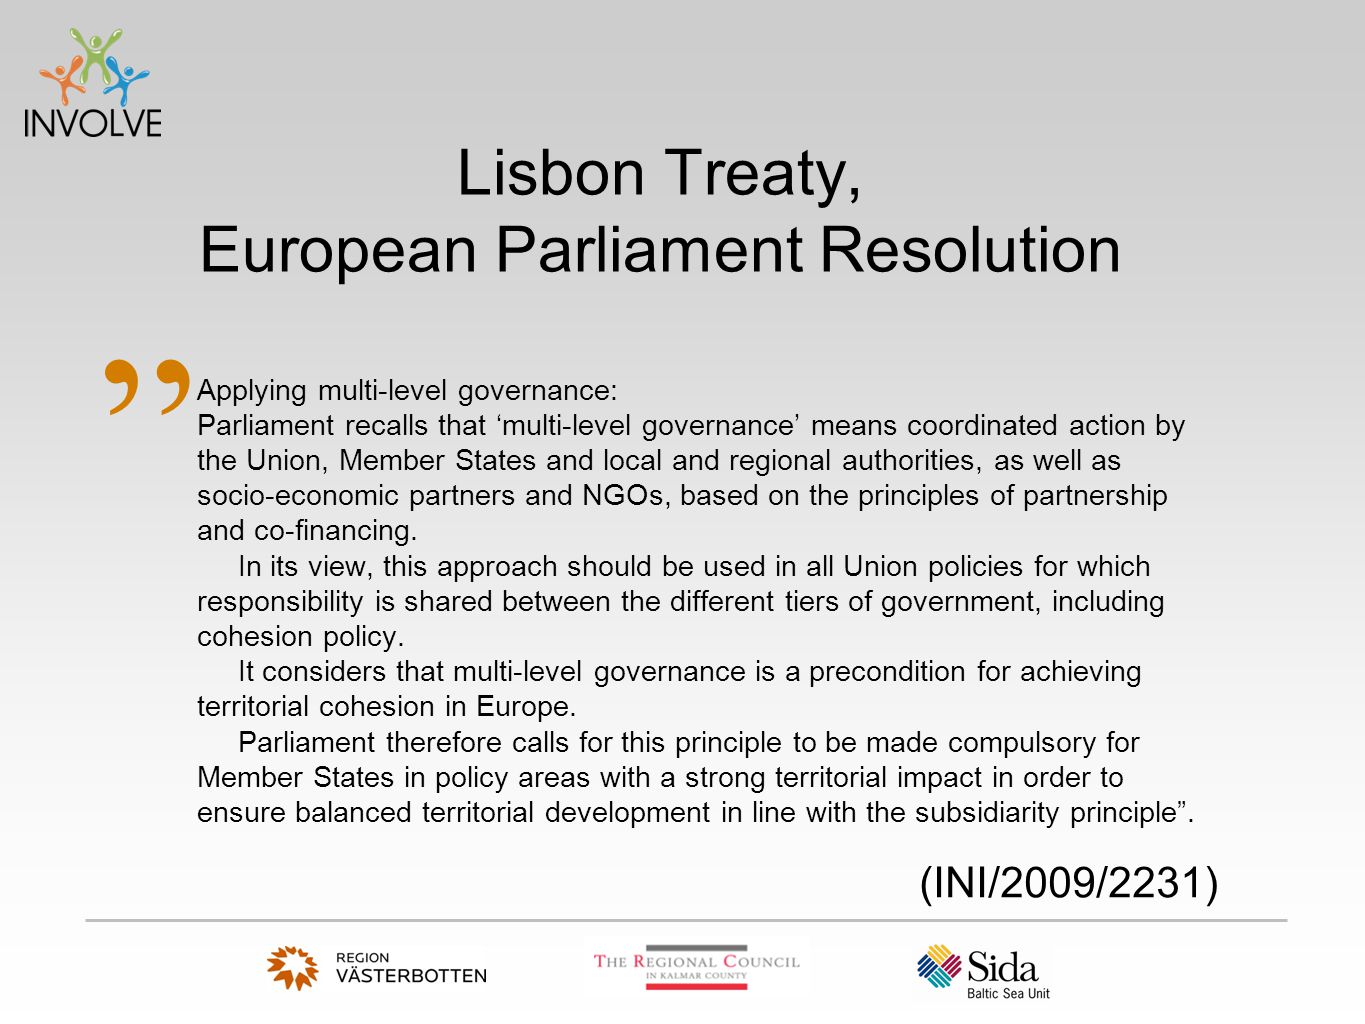 Lisbon Treaty, European Parliament Resolution Applying multi-level governance: Parliament recalls that ‘multi-level governance’ means coordinated action by the Union, Member States and local and regional authorities, as well as socio-economic partners and NGOs, based on the principles of partnership and co-financing.